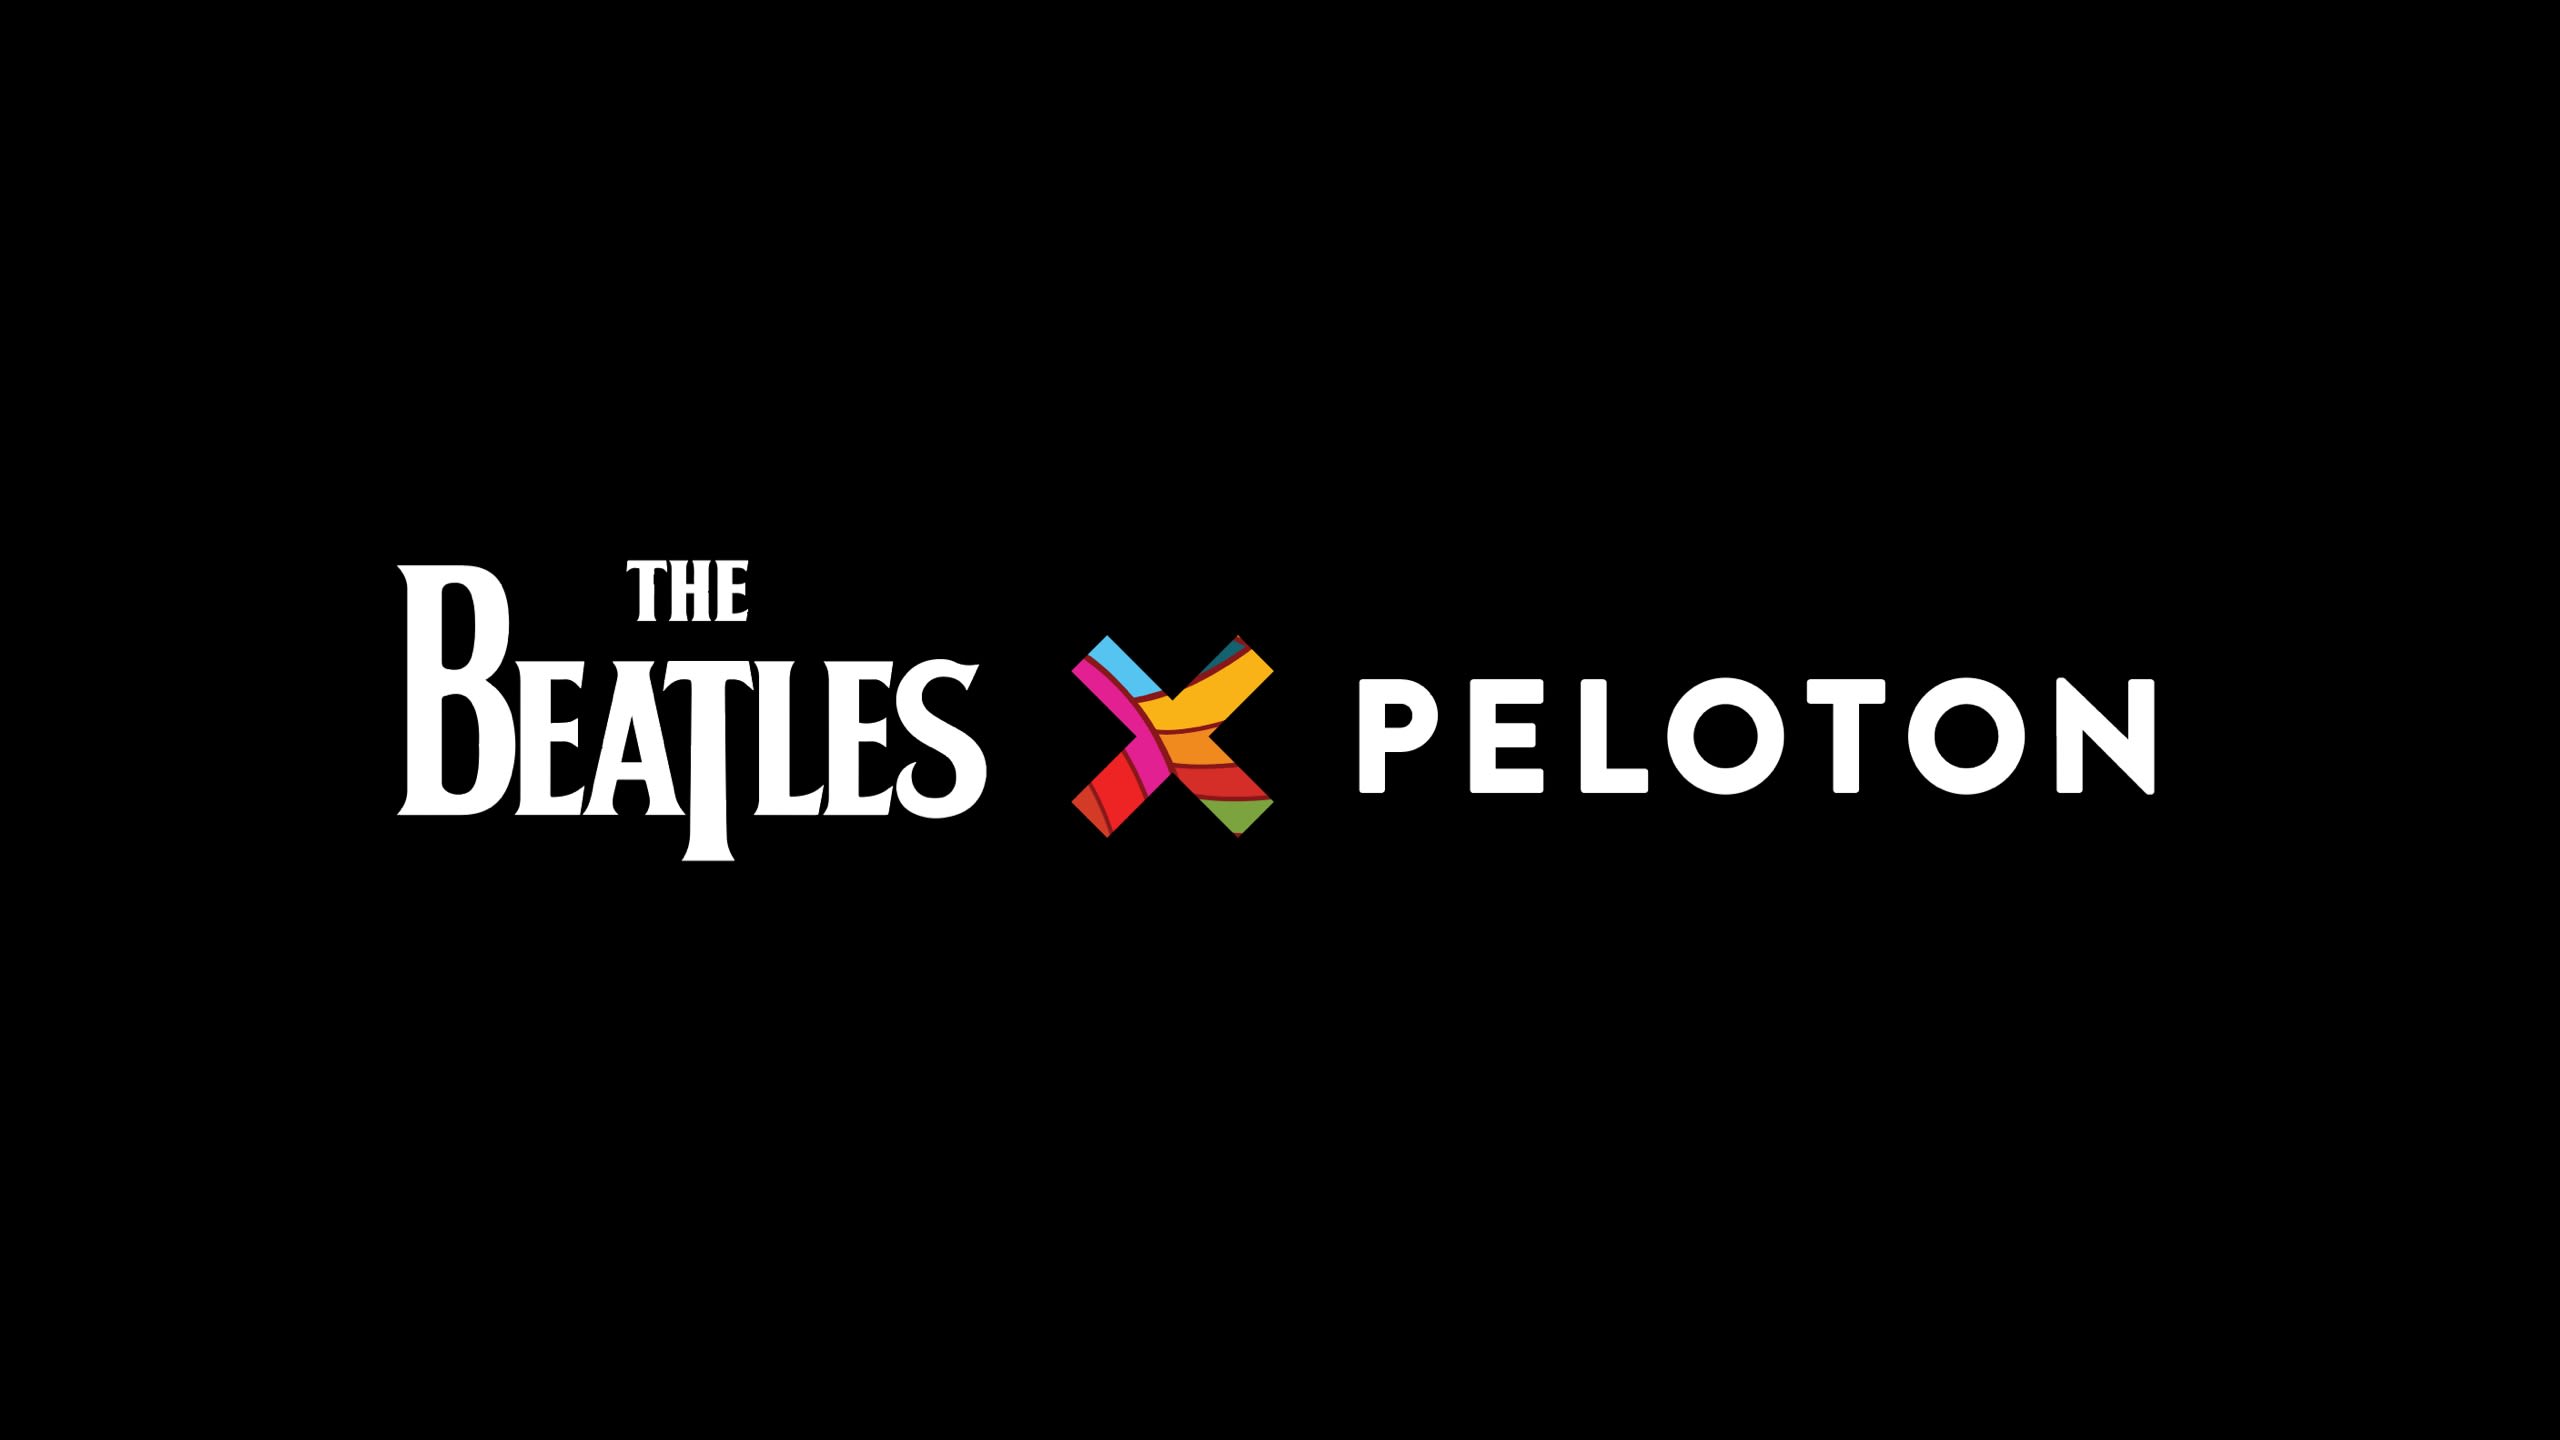 Christmastime Is Here Again! The Beatles Come to Peloton